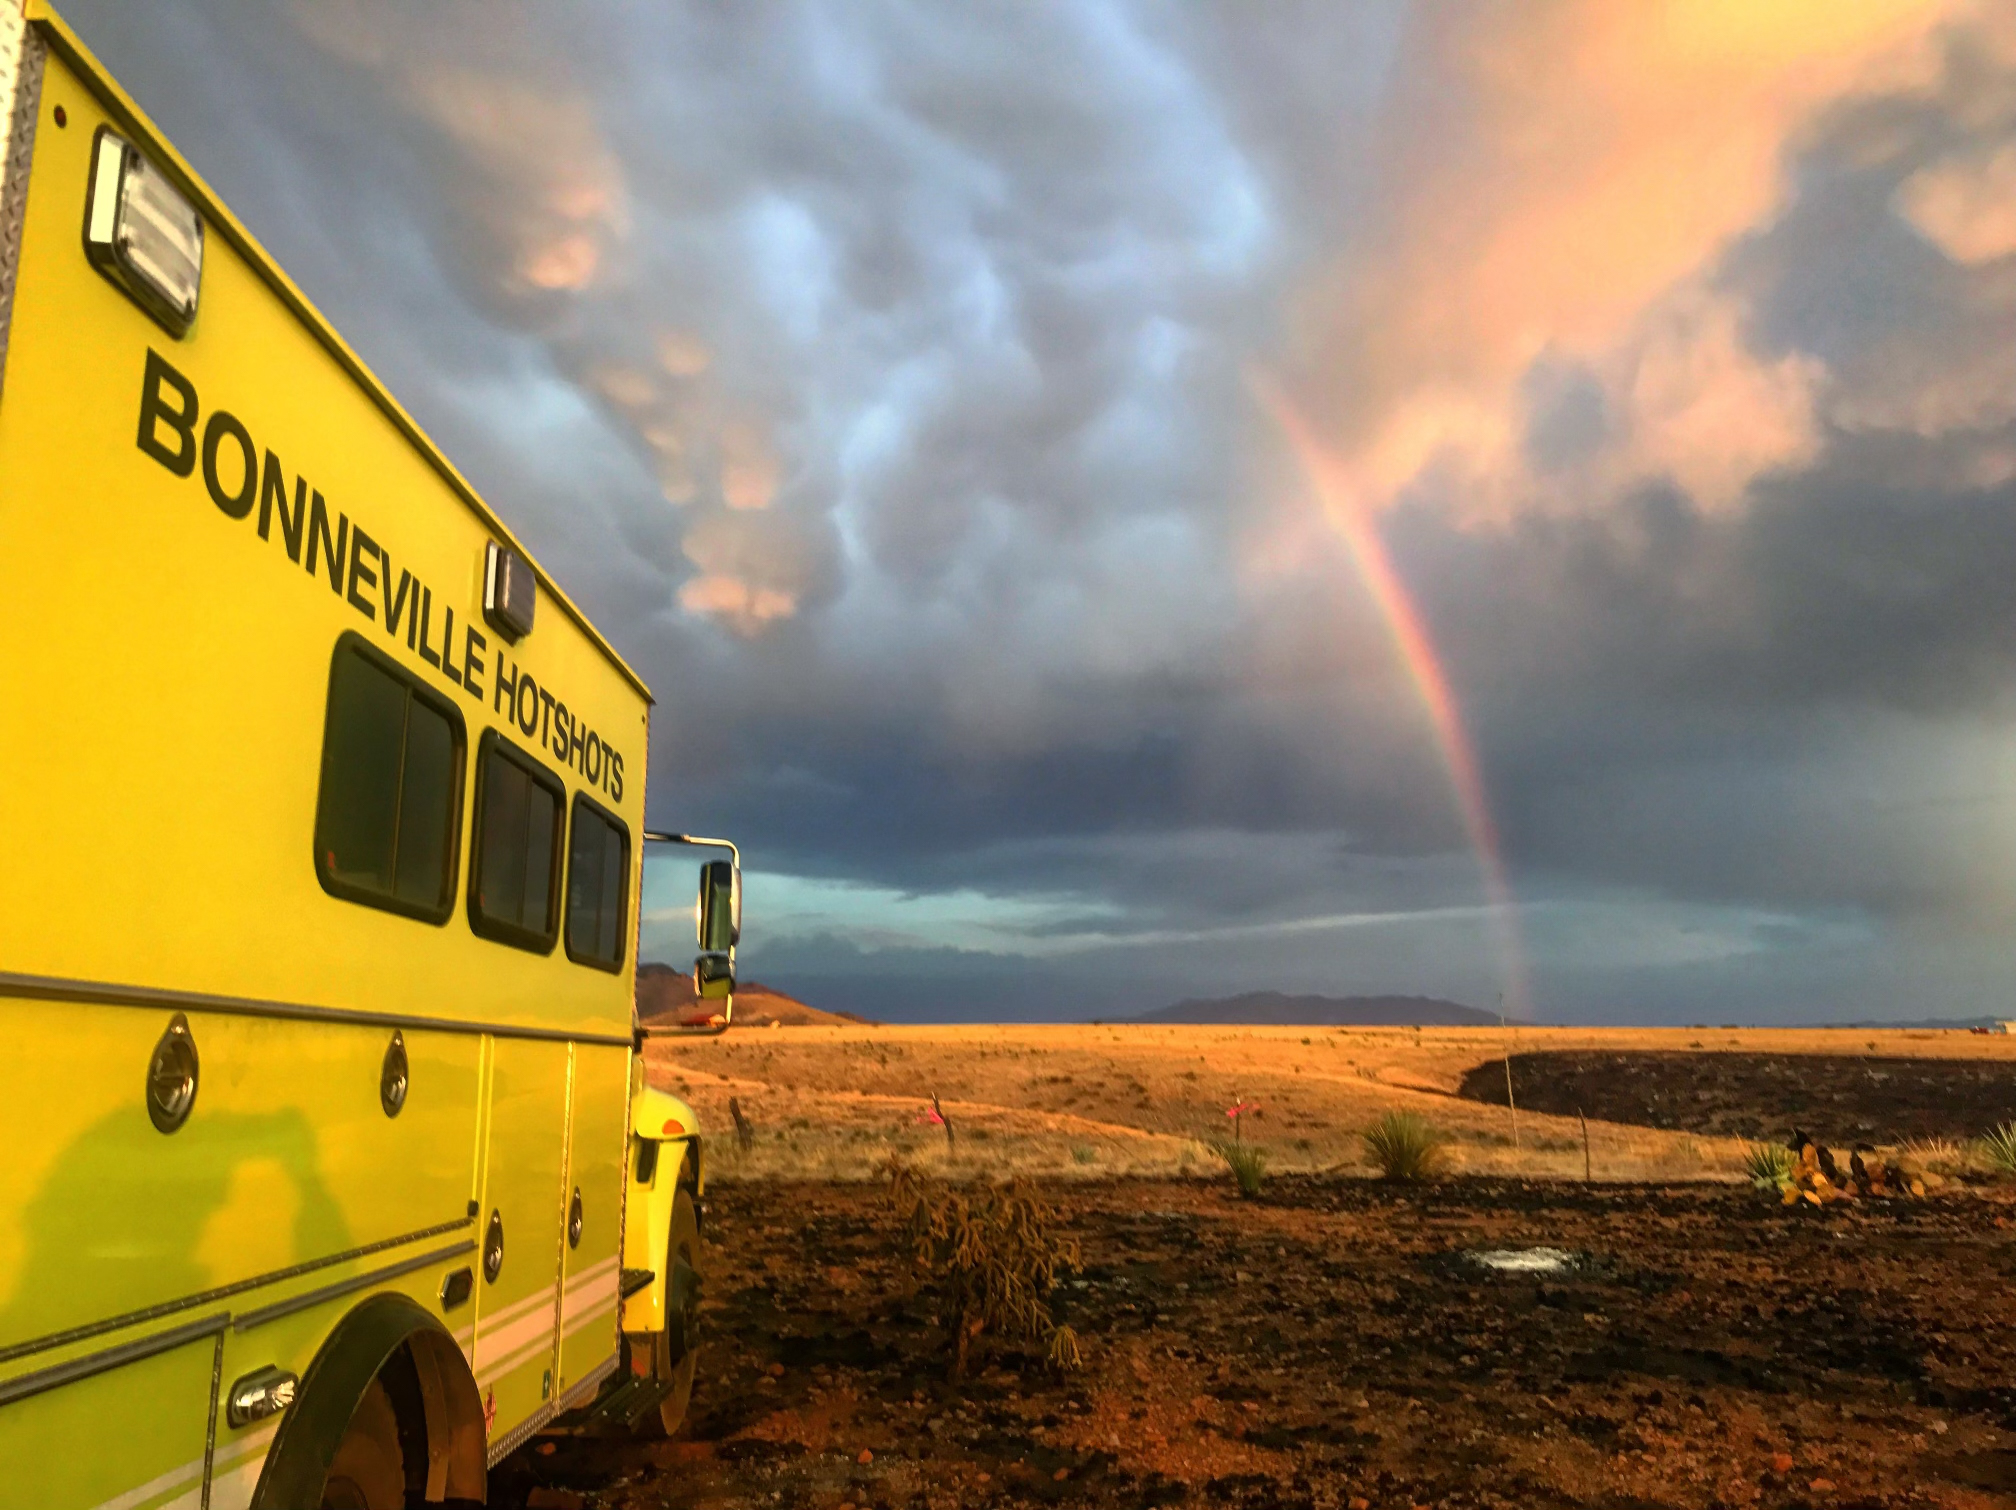 Bonneville Hotshots vehicle with rainbow in the background.